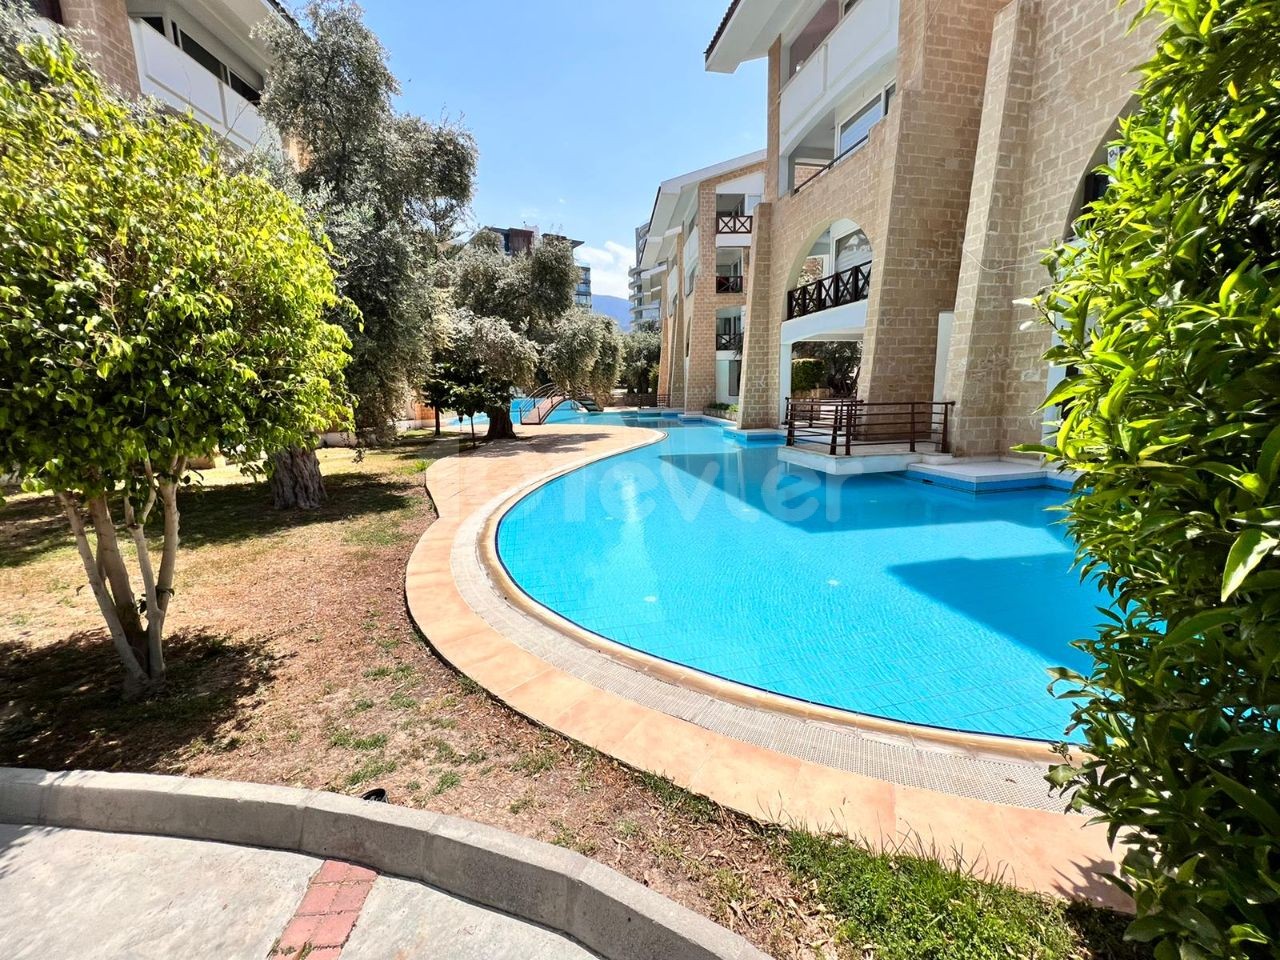 1+ APARTMENT WITH SHARED POOL FOR SALE WITH FURNITURE IN KYRENIA, CYPRUS ** 